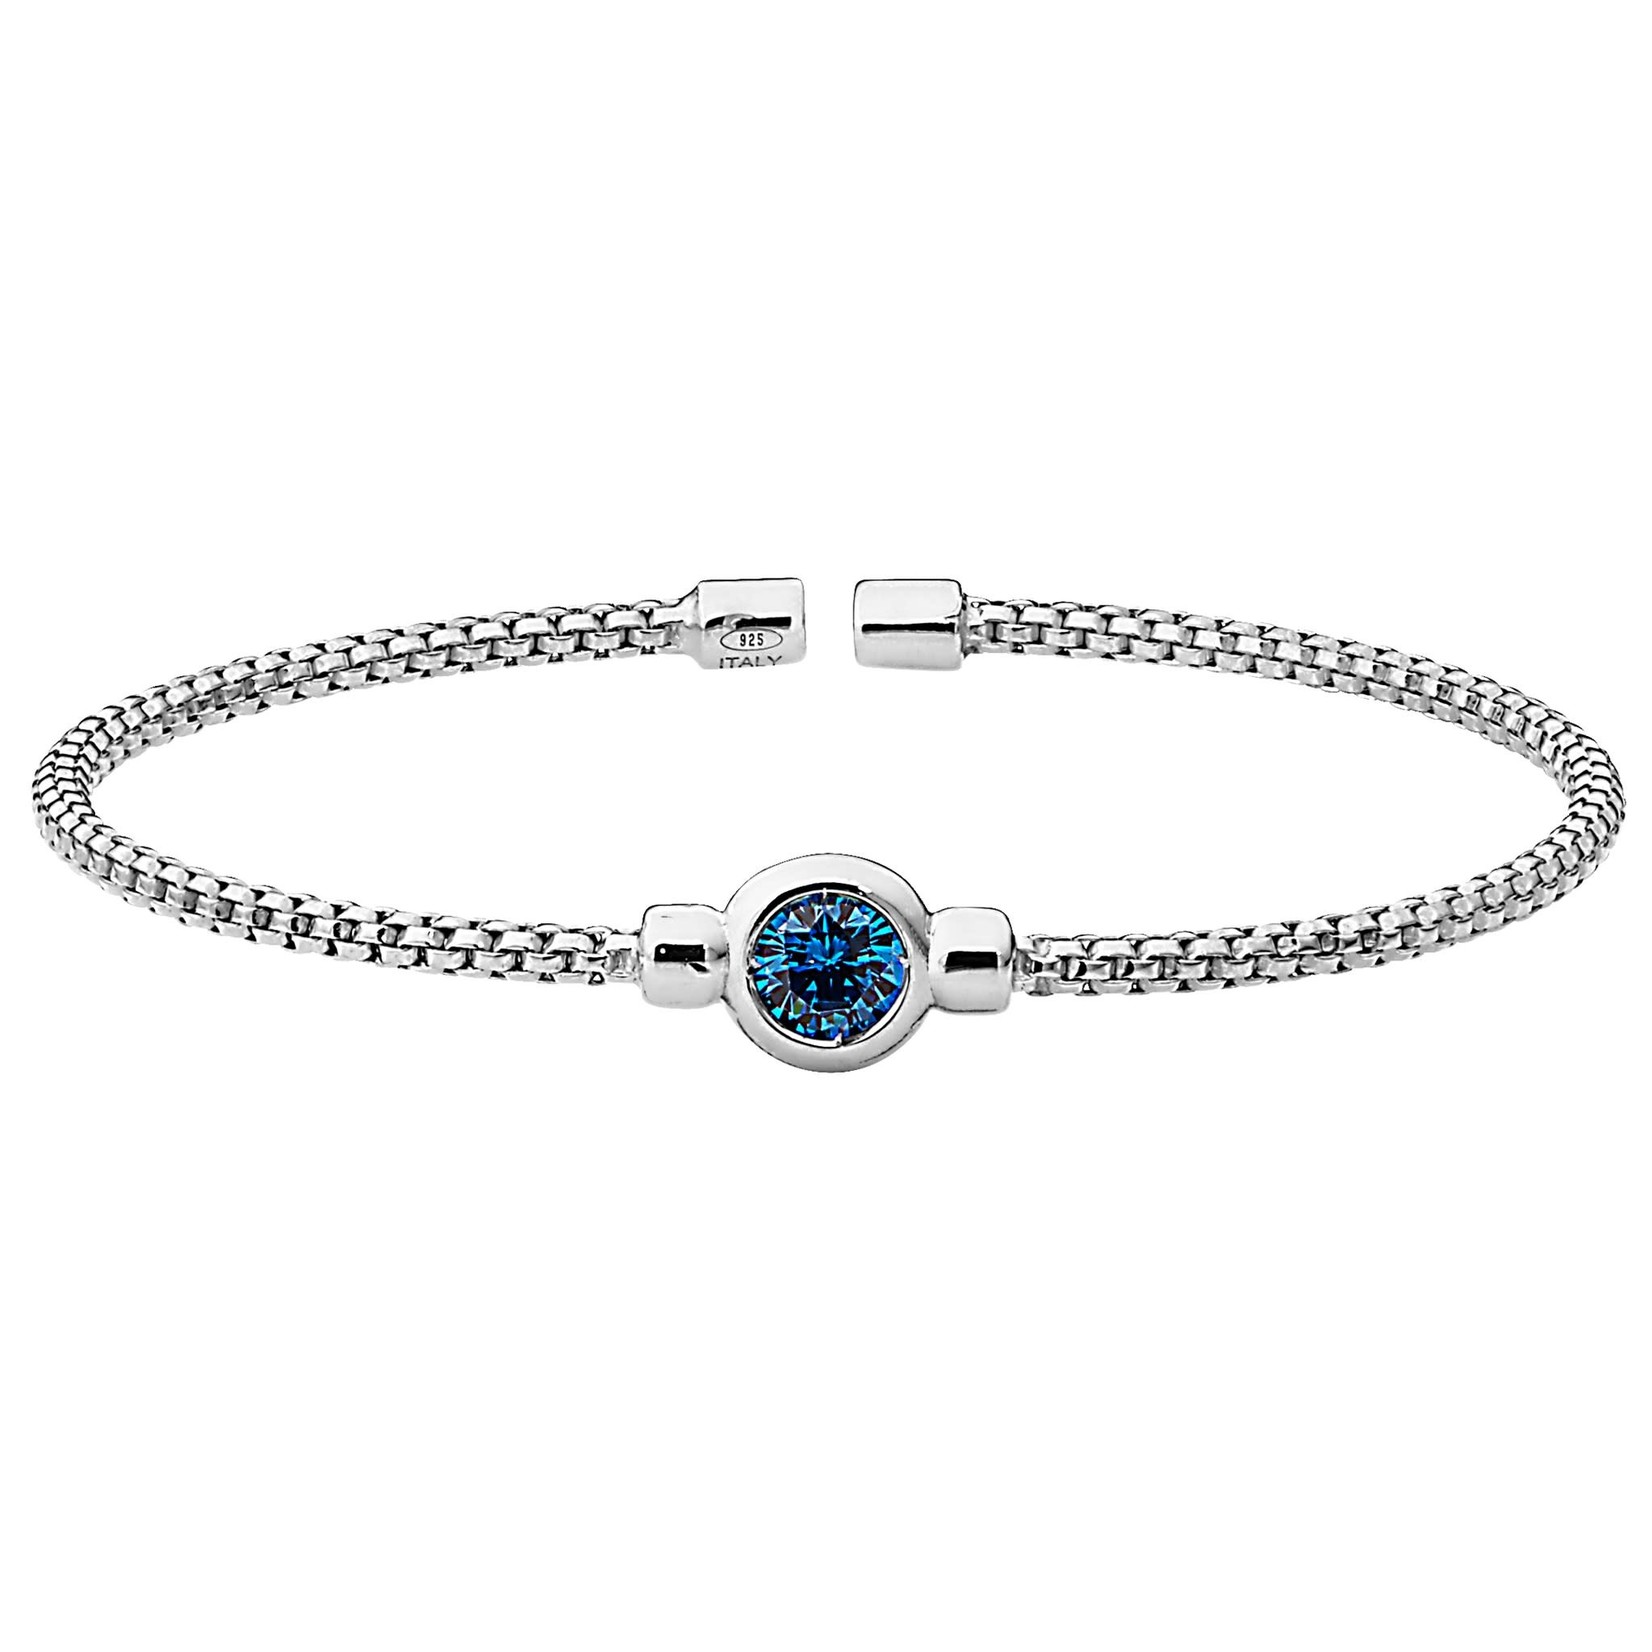 KELLY WATERS INC. Sterling Silver Simulated Blue Topaz Cuff Bracelet